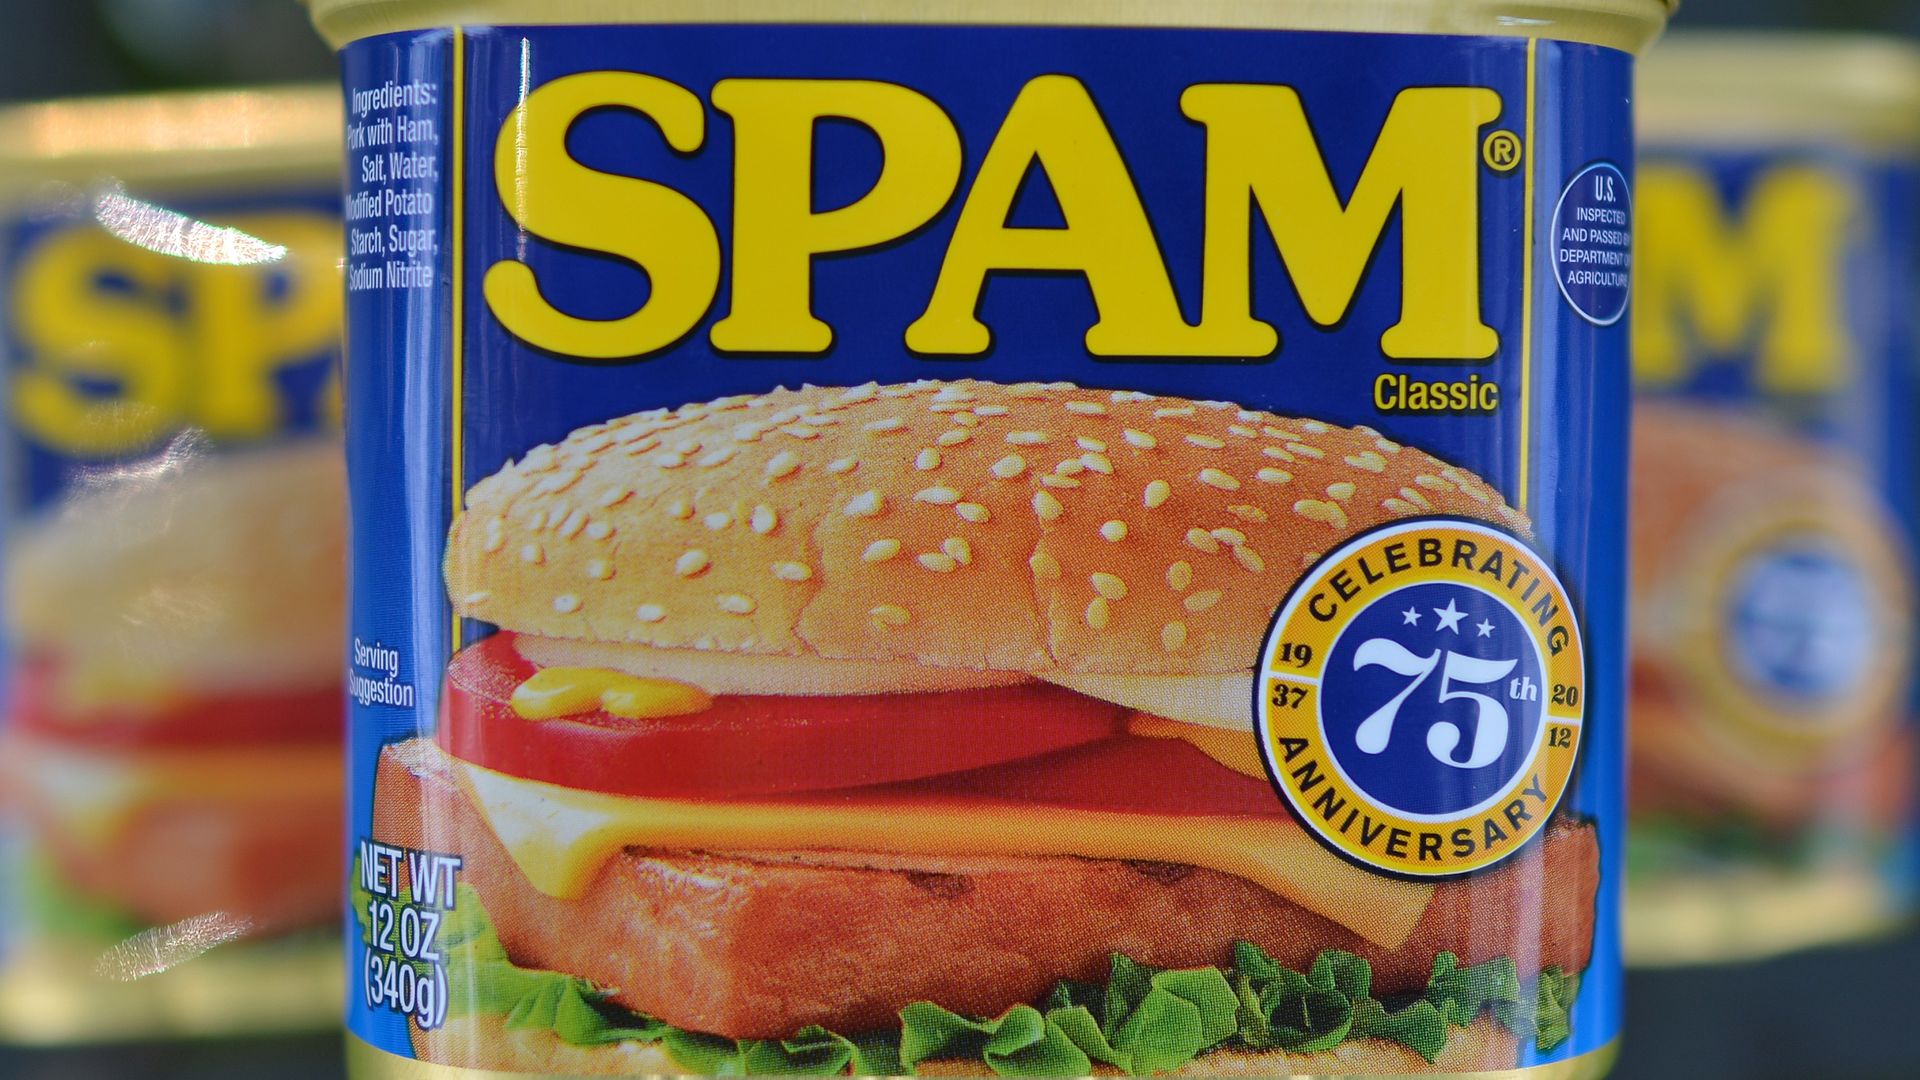 Hormel Foods announced it is donating 264,000 cans of Spam to the Hawaii wildfire victims. The cans total up to  million in value.